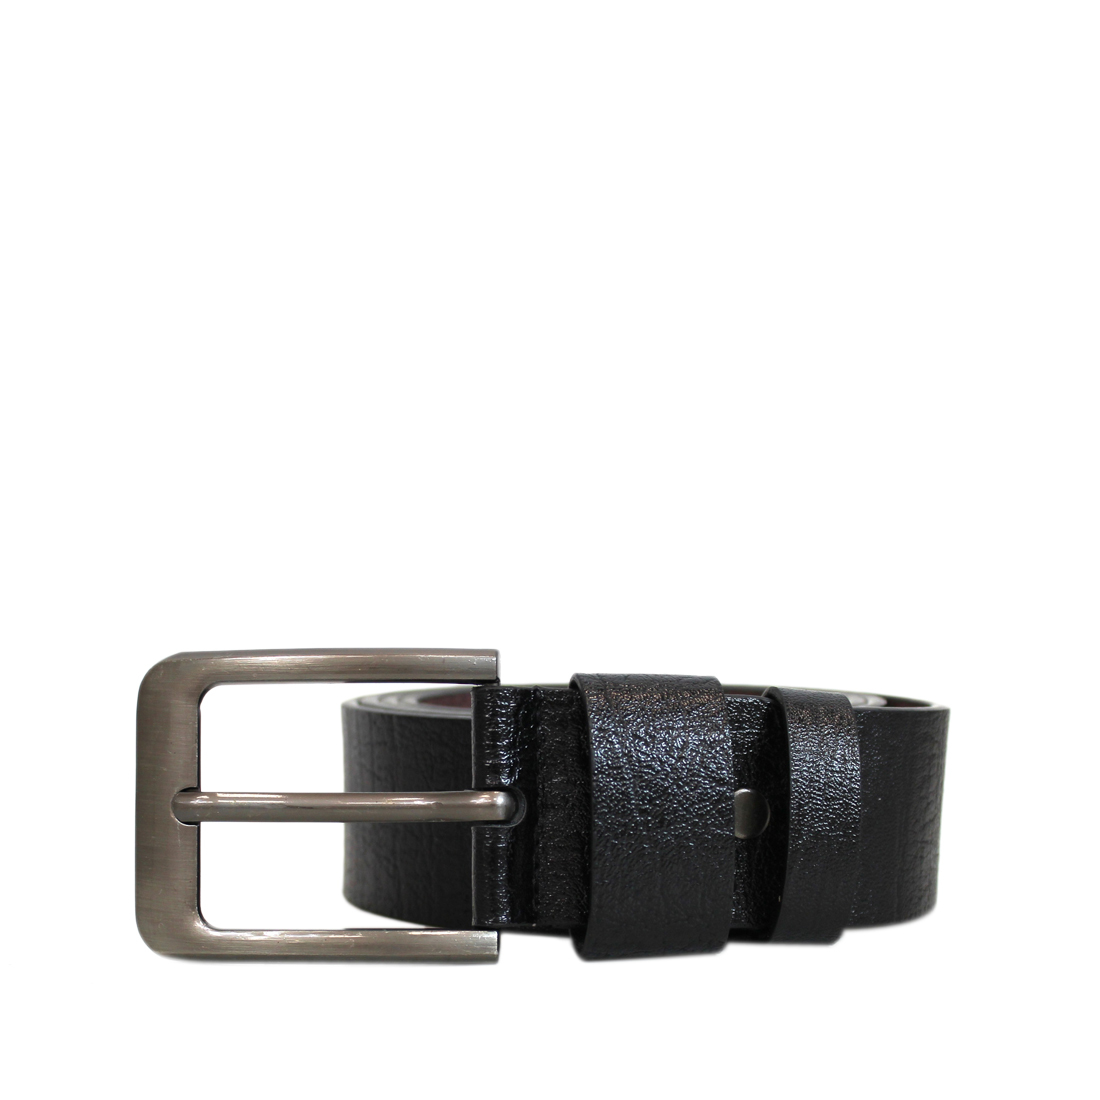 Real leather with rectanglar buckle